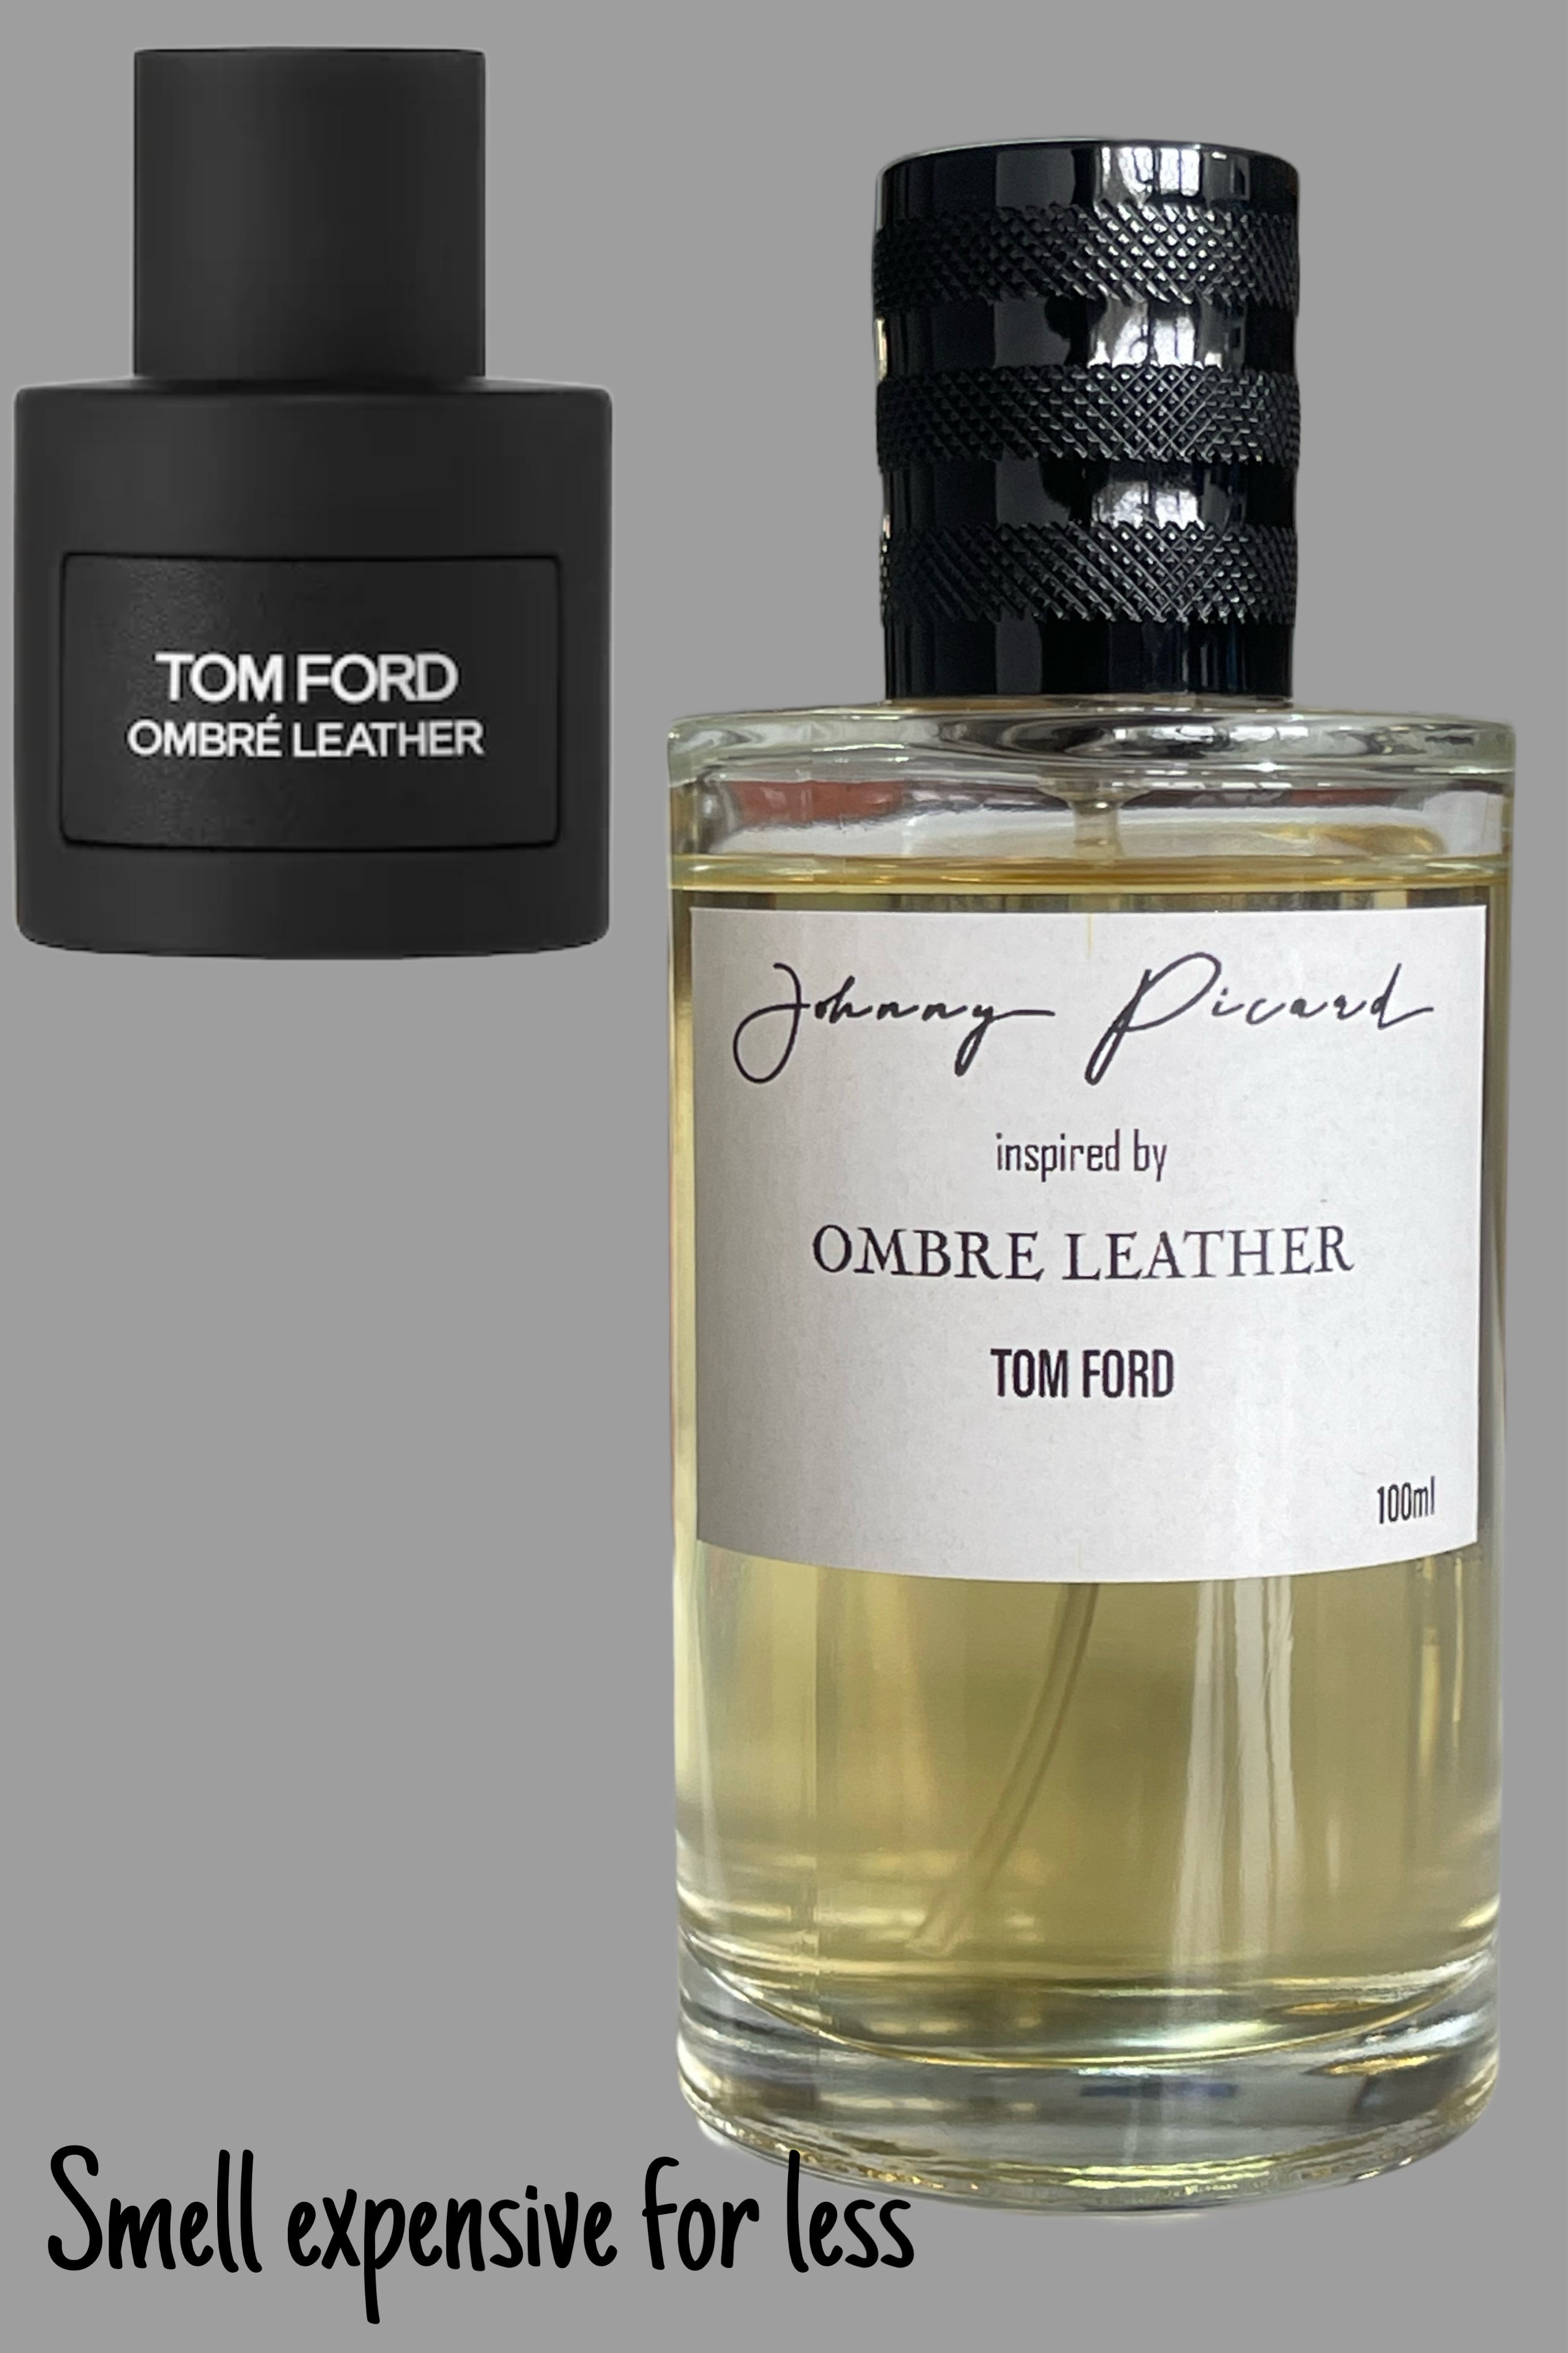 Johnny Picard inspired by Ombré Leather TOM FORD